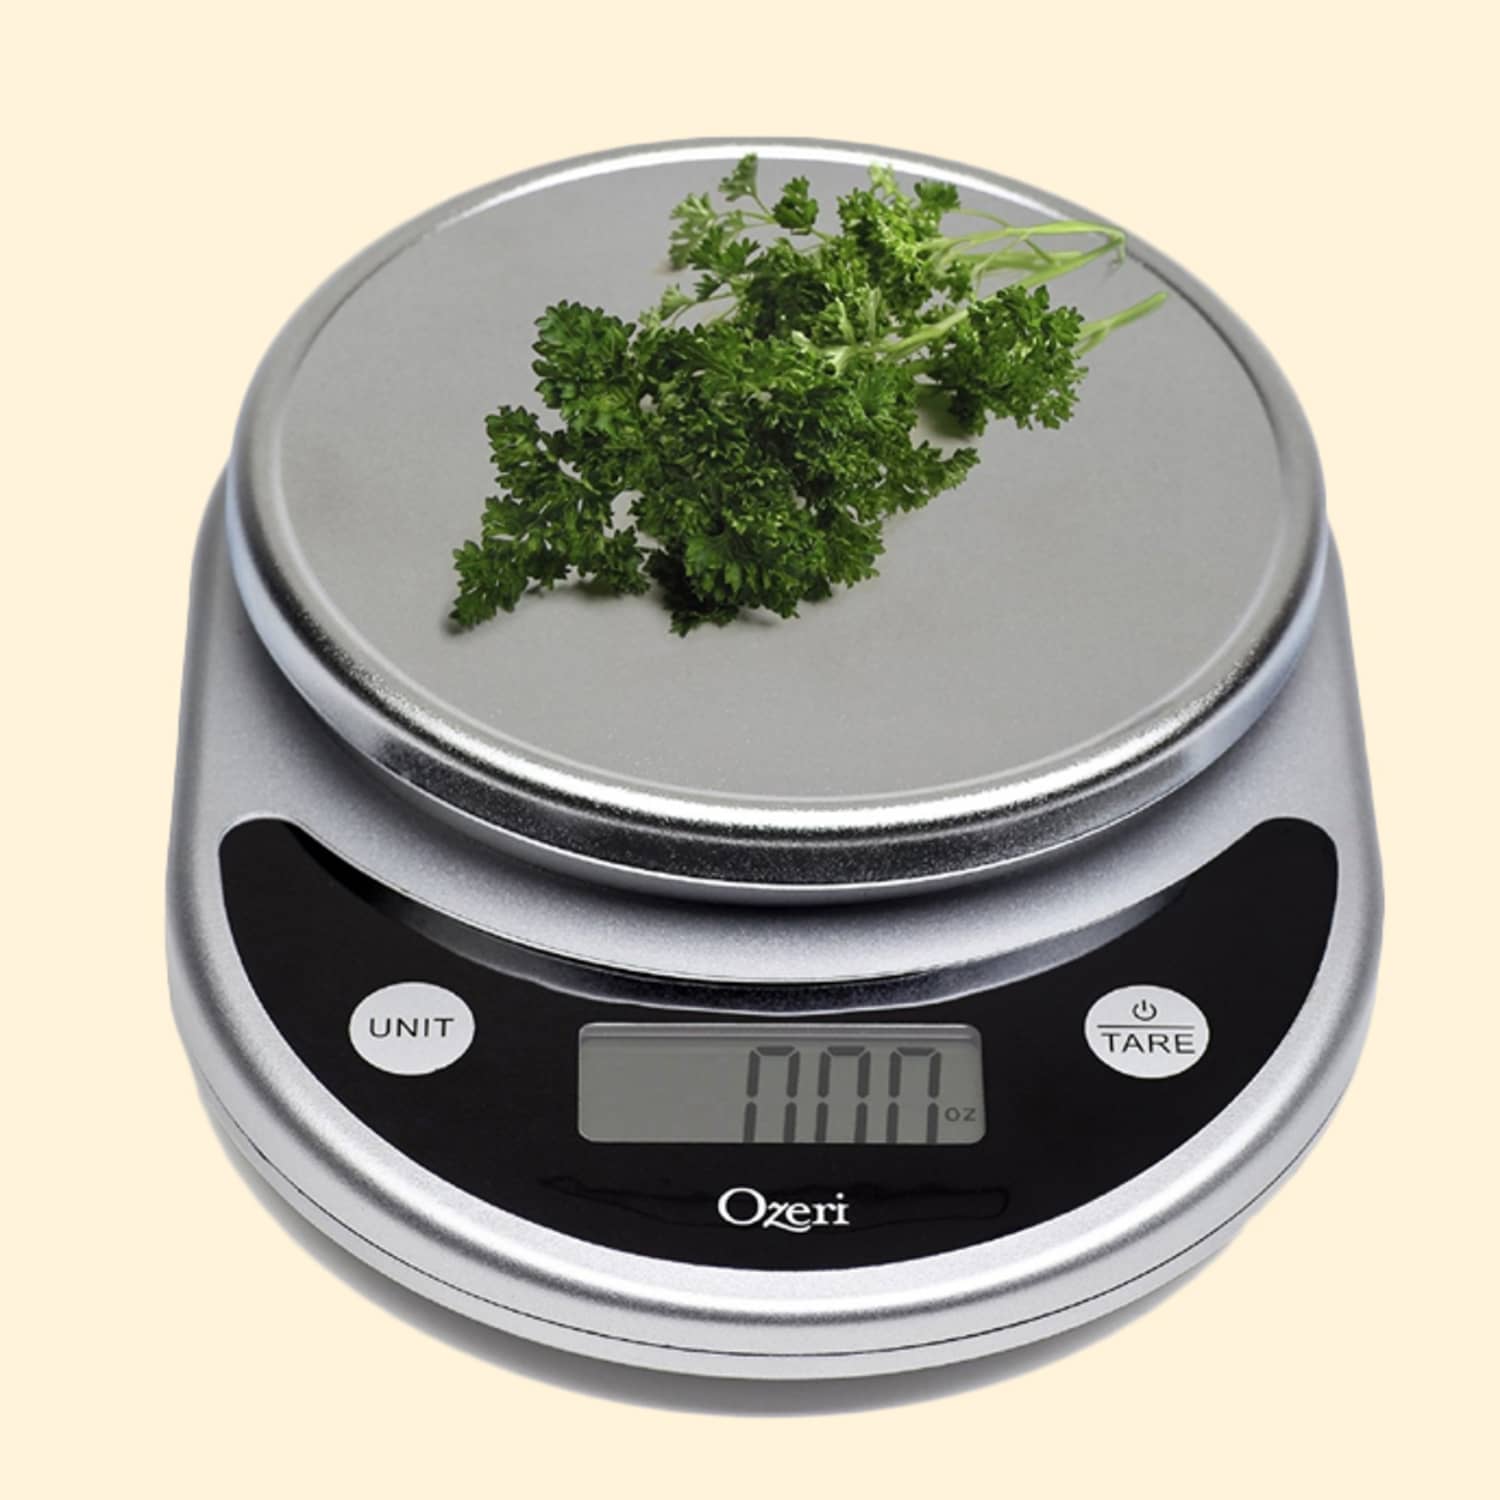 Are There Benefits to Using a Food Scale?